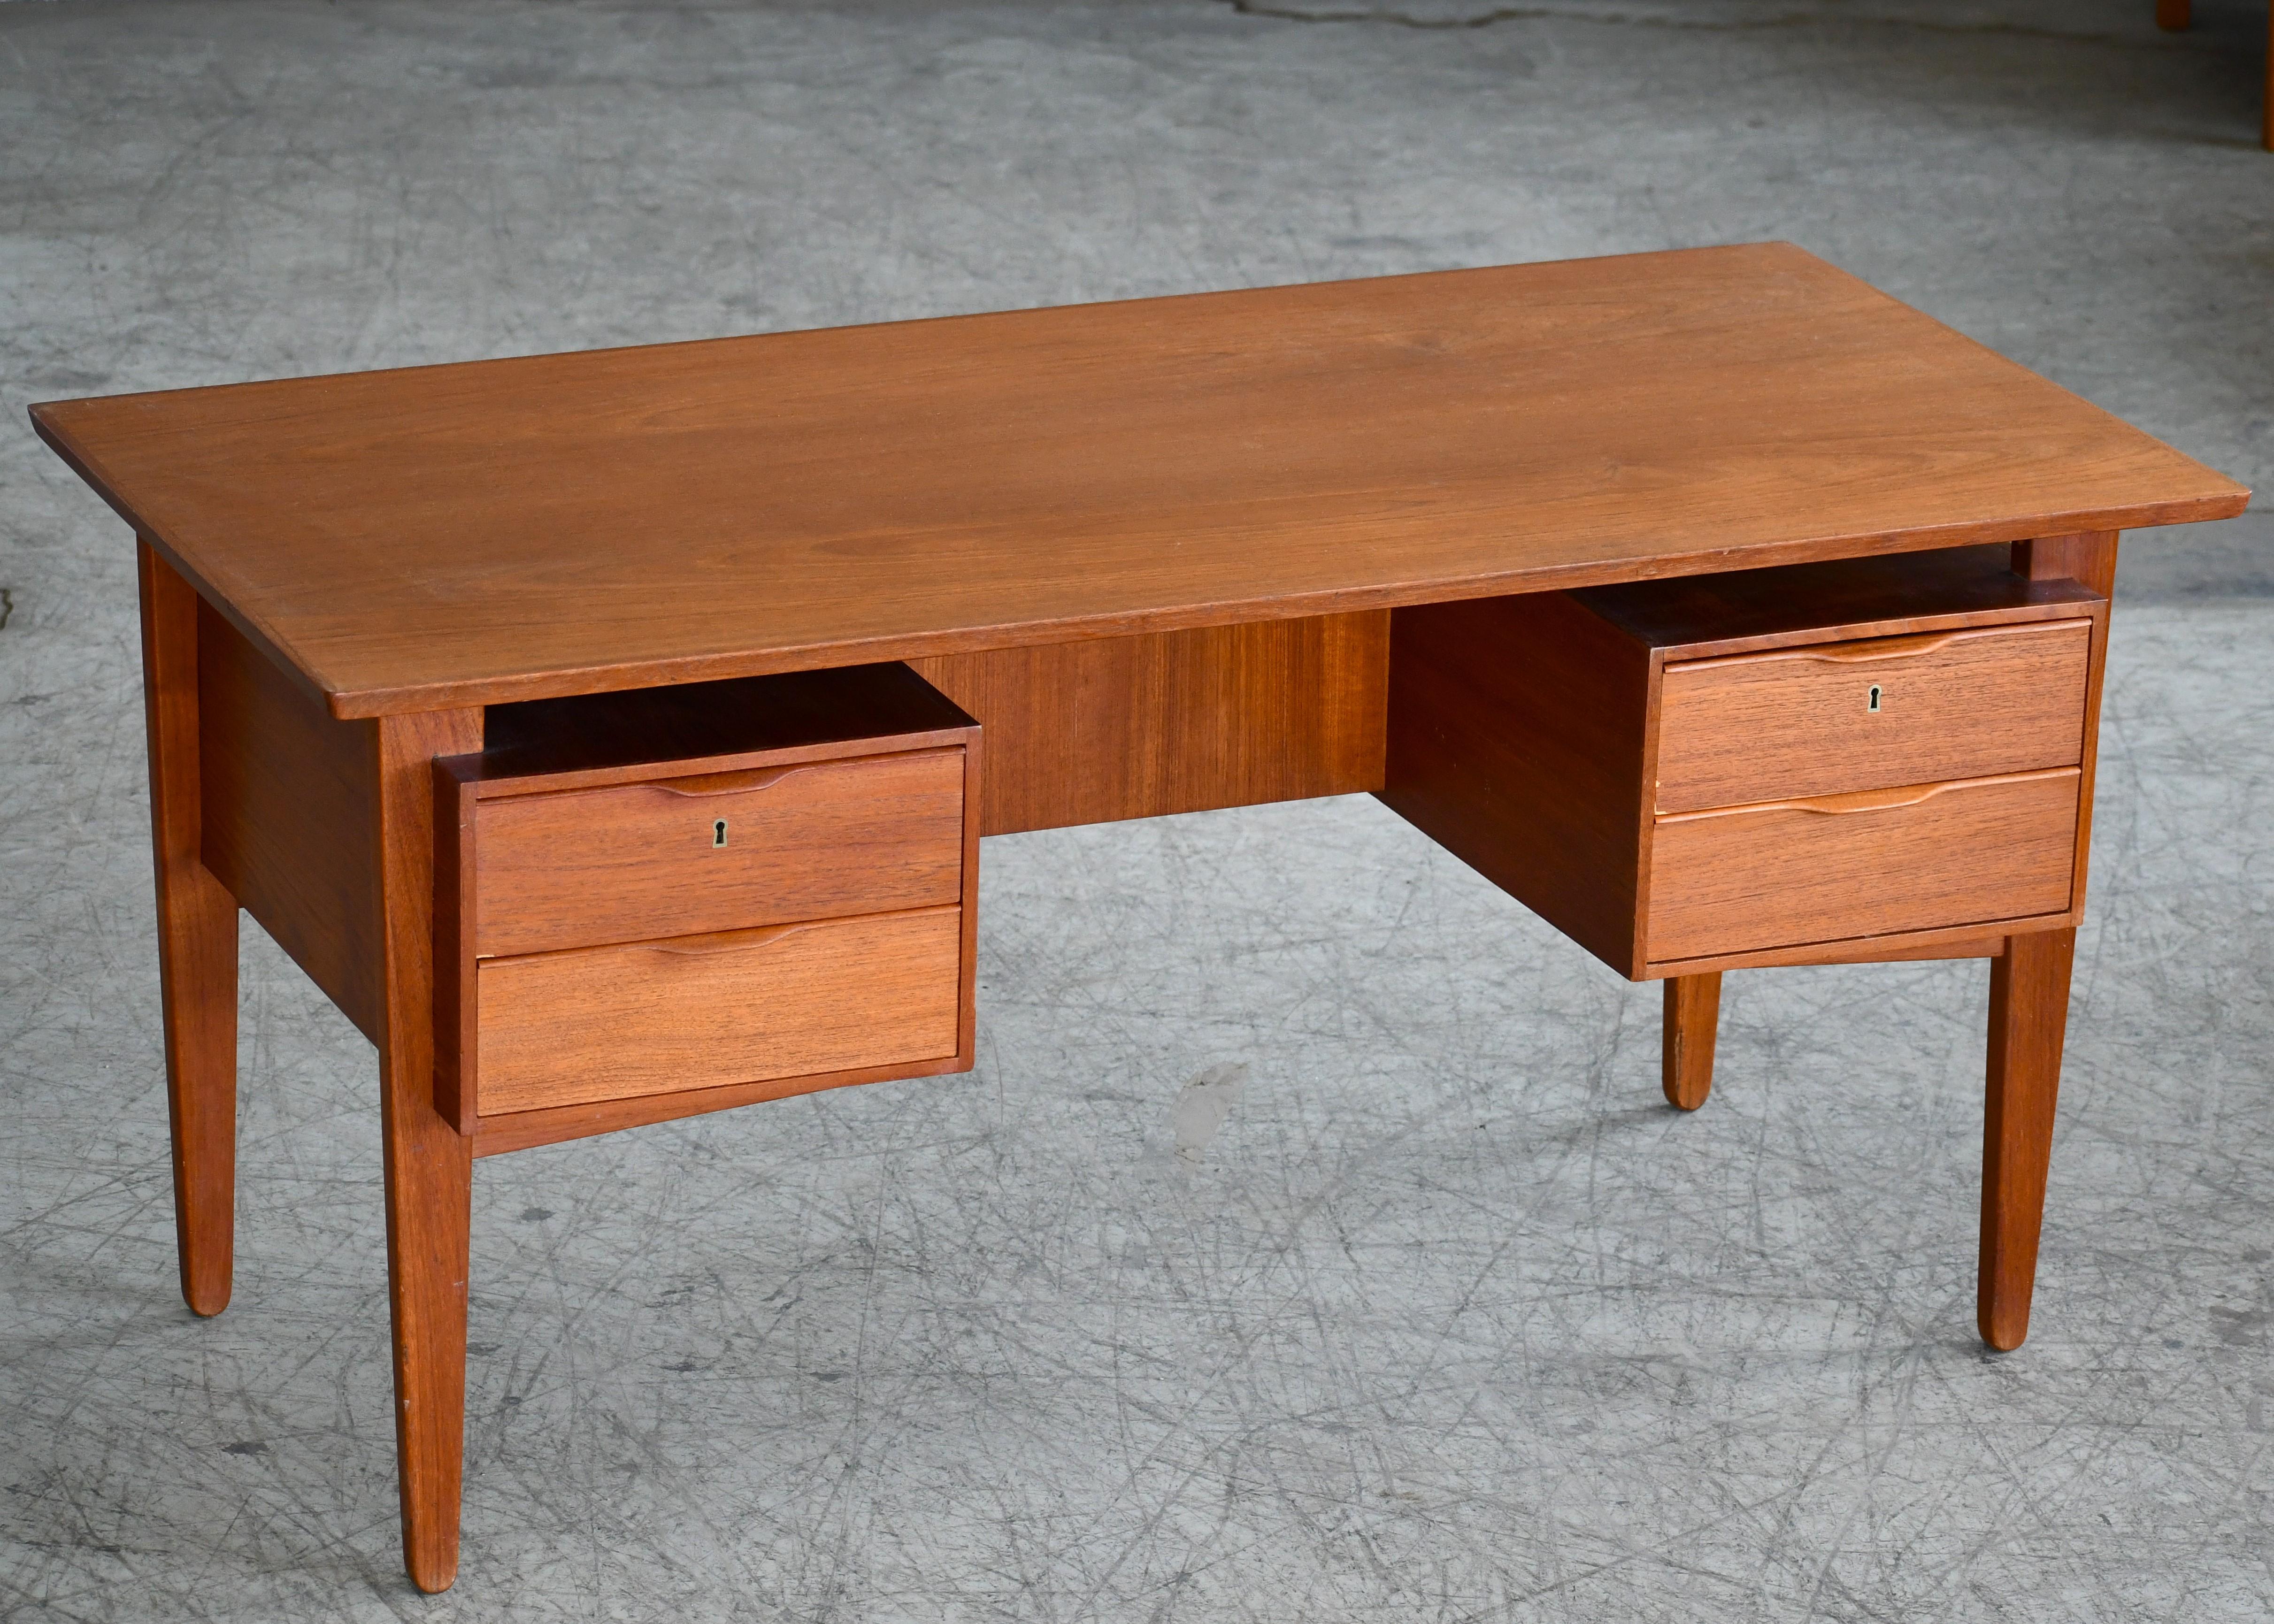 Mid-20th Century Executive Desk with Floating Top in Teak Near Mint Condition, Denmark 1960s For Sale